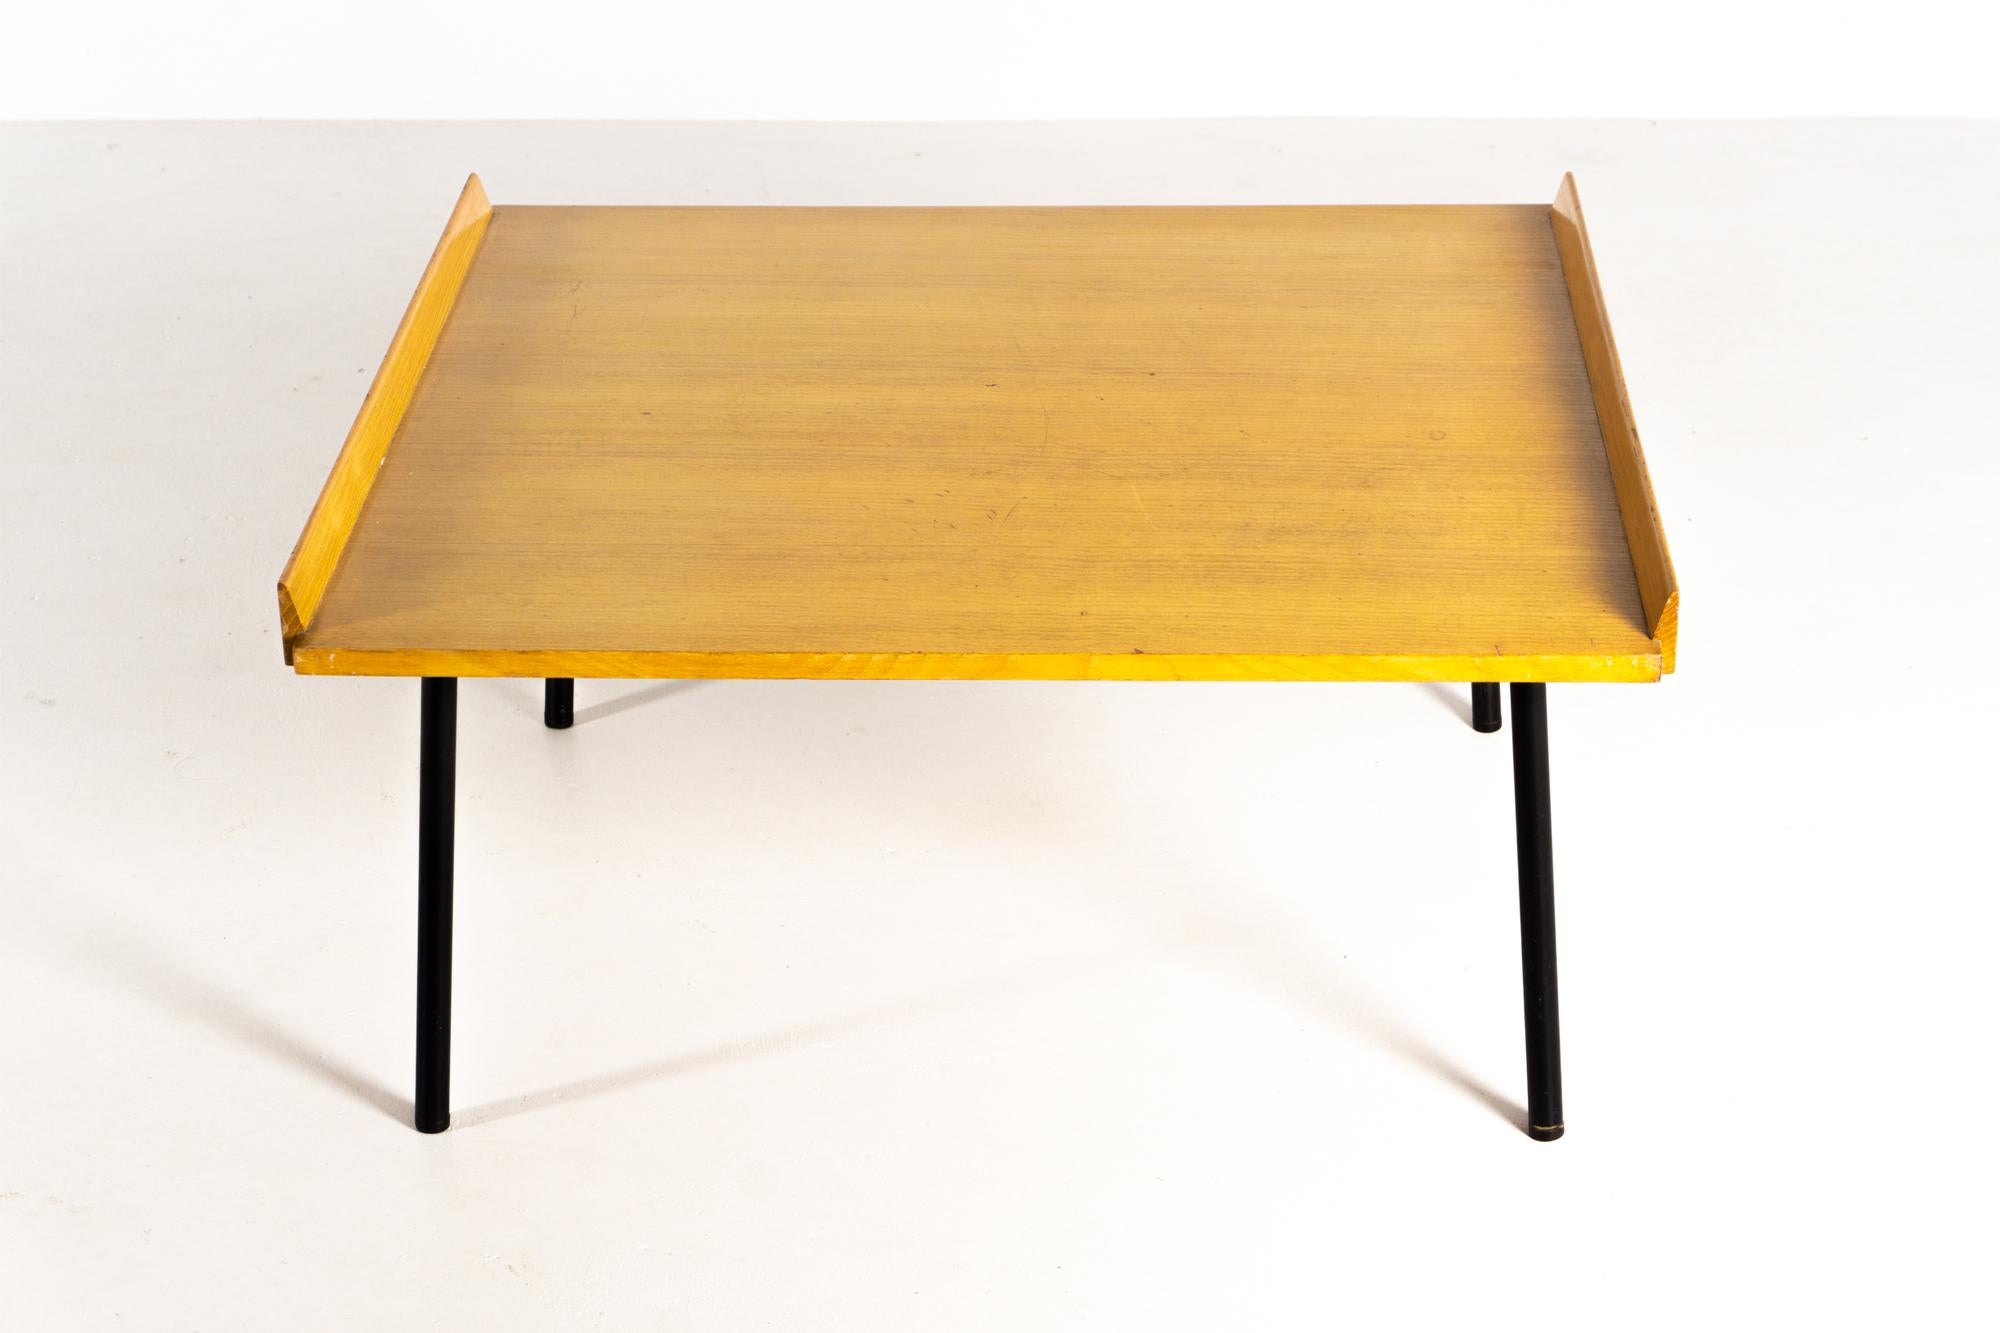 Side Table / Coffee Table by ISA Bergamo with square top. Veneered and framed in light wood structure, black-lacquered metal legs.

Italian furniture manufacturer I.S.A. (Industria Salotti e Arredamenti) -also known as ISA, ISA Bergamo and ISA,